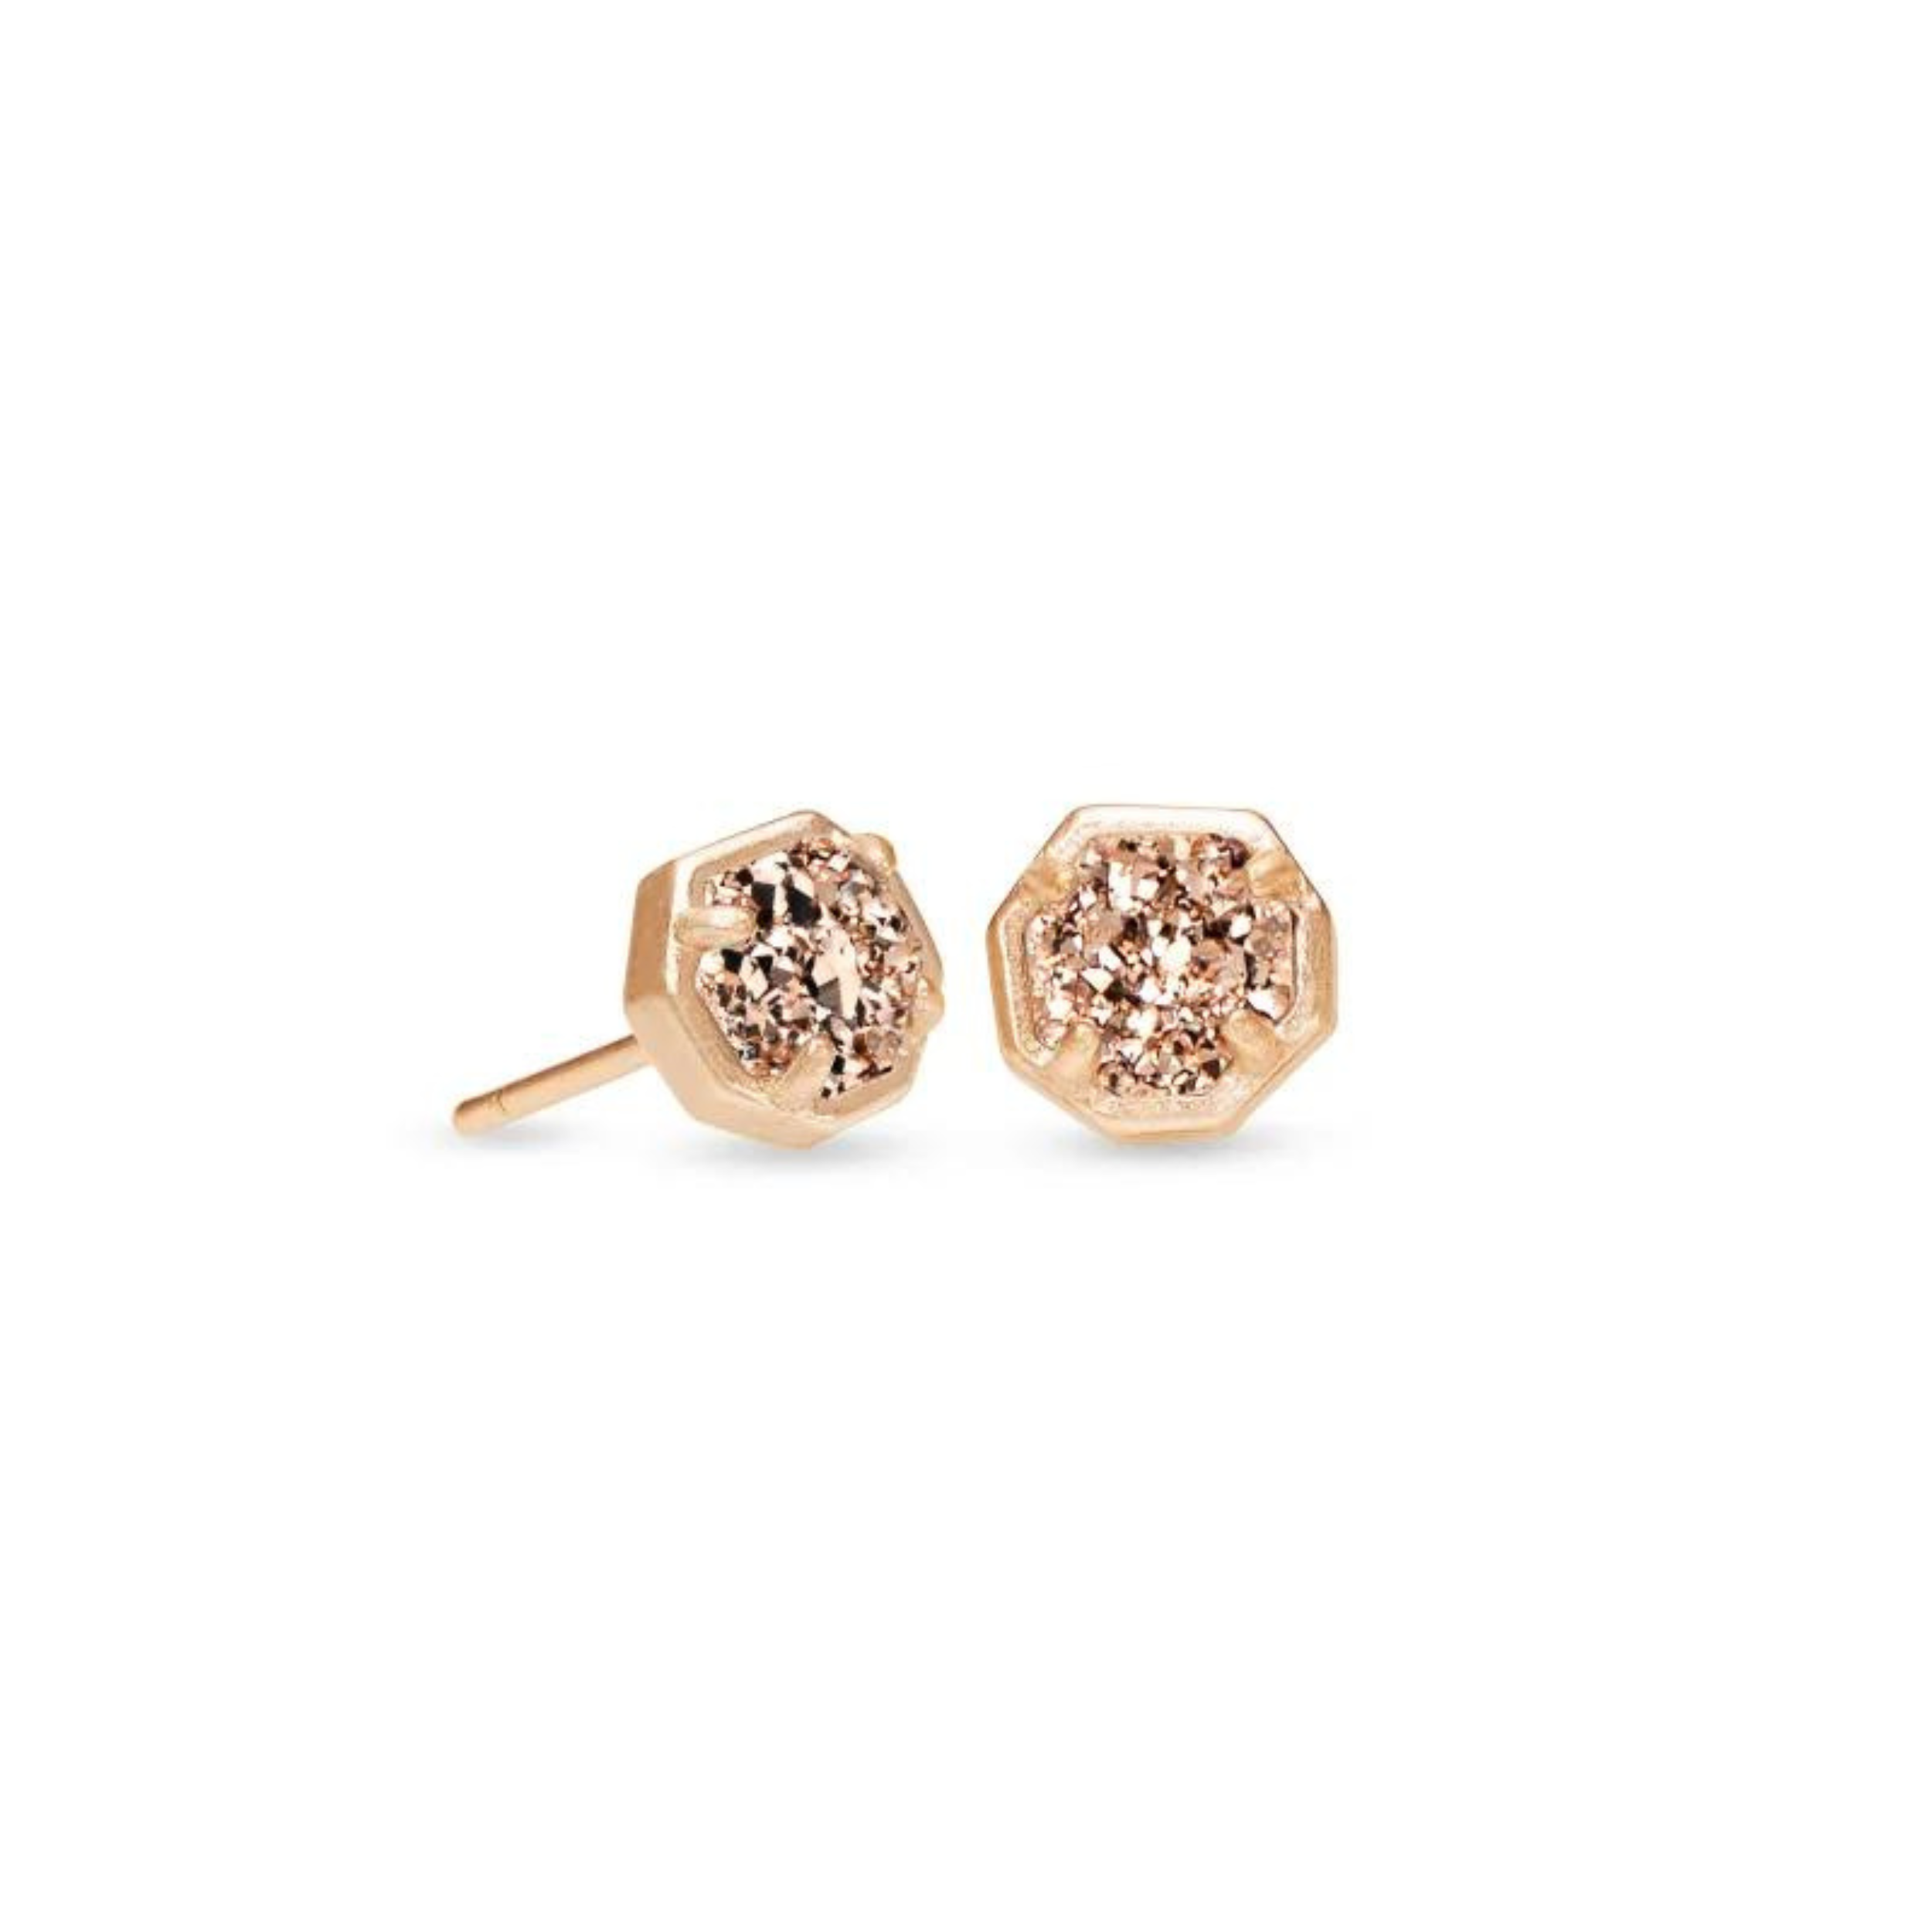 Rose gold hexagon shaped earrings with rose gold drusy stones, pictured on a white background.